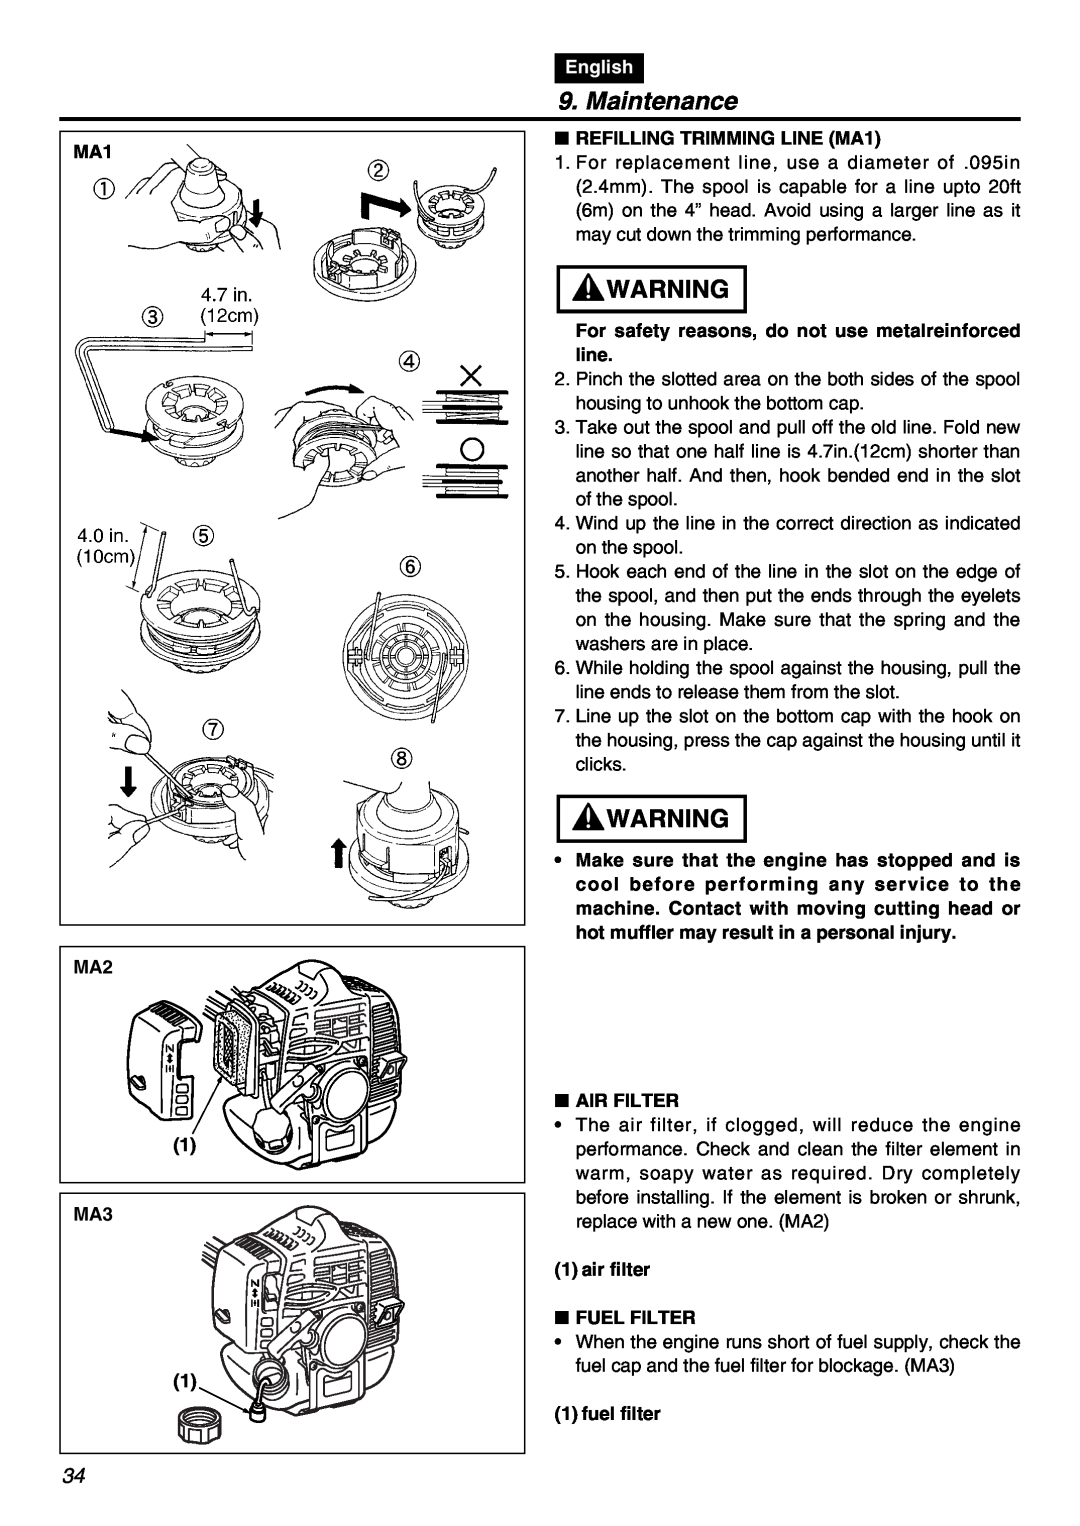 RedMax BCZ2401S manual Maintenance, MA1 MA2, English, REFILLING TRIMMING LINE MA1, Air Filter, air filter FUEL FILTER 